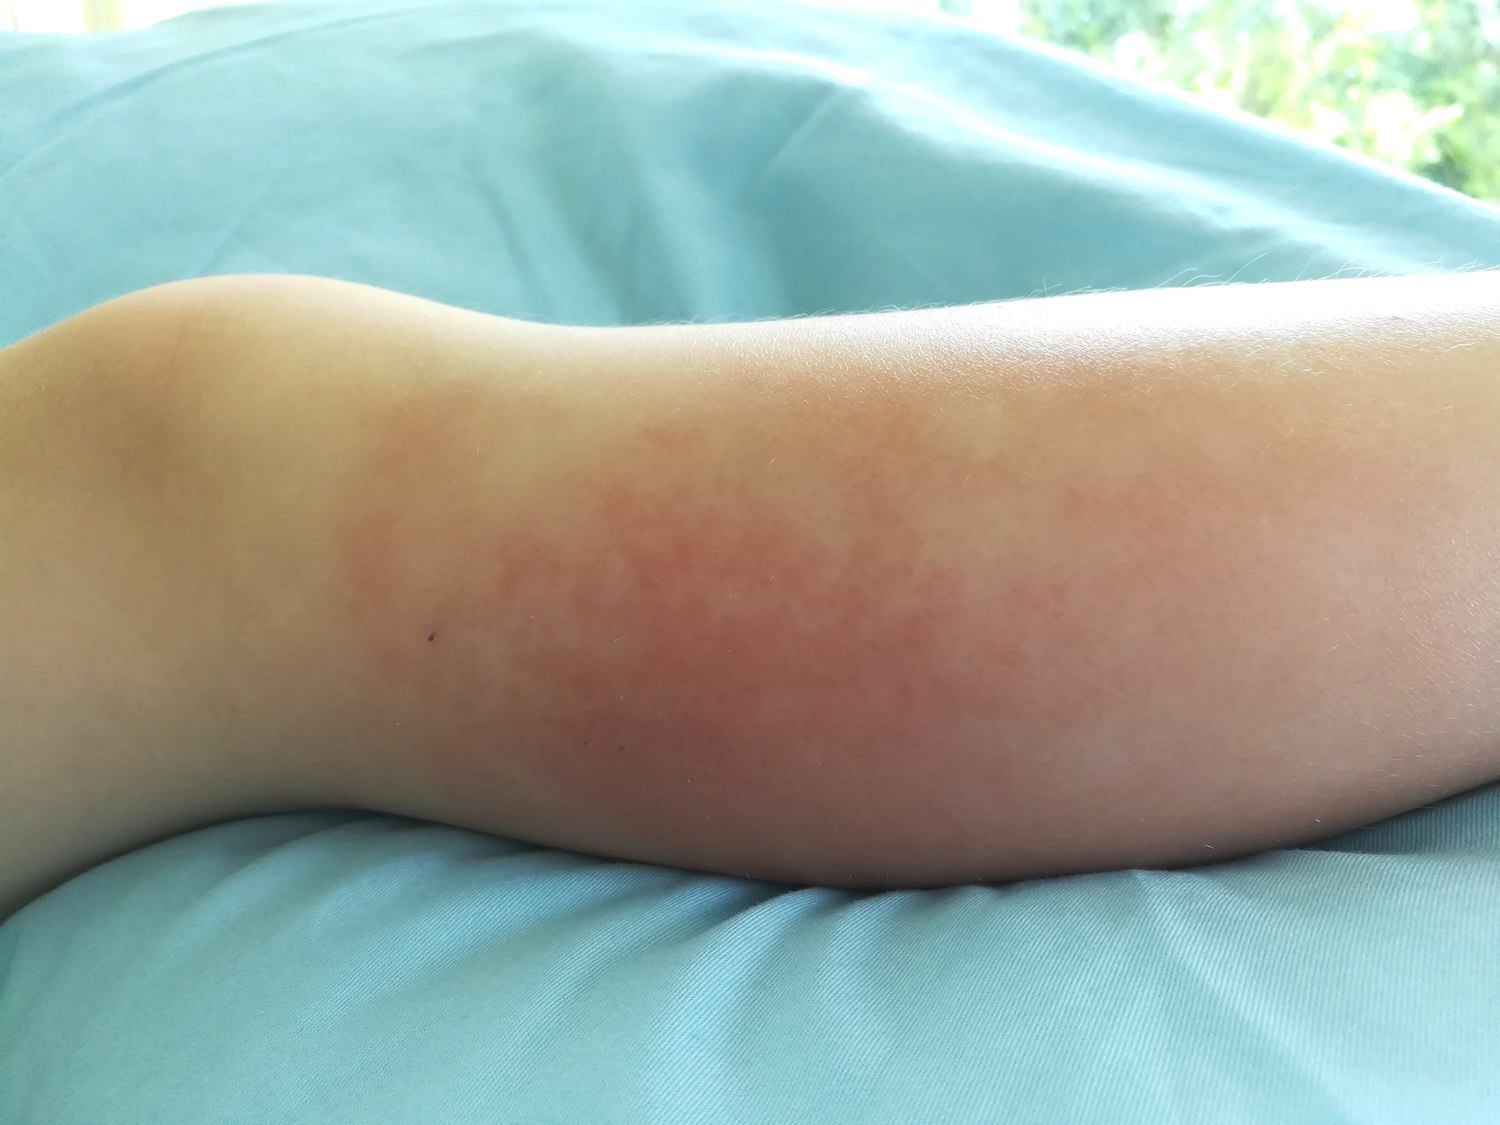 cellulitis warm or cold compress